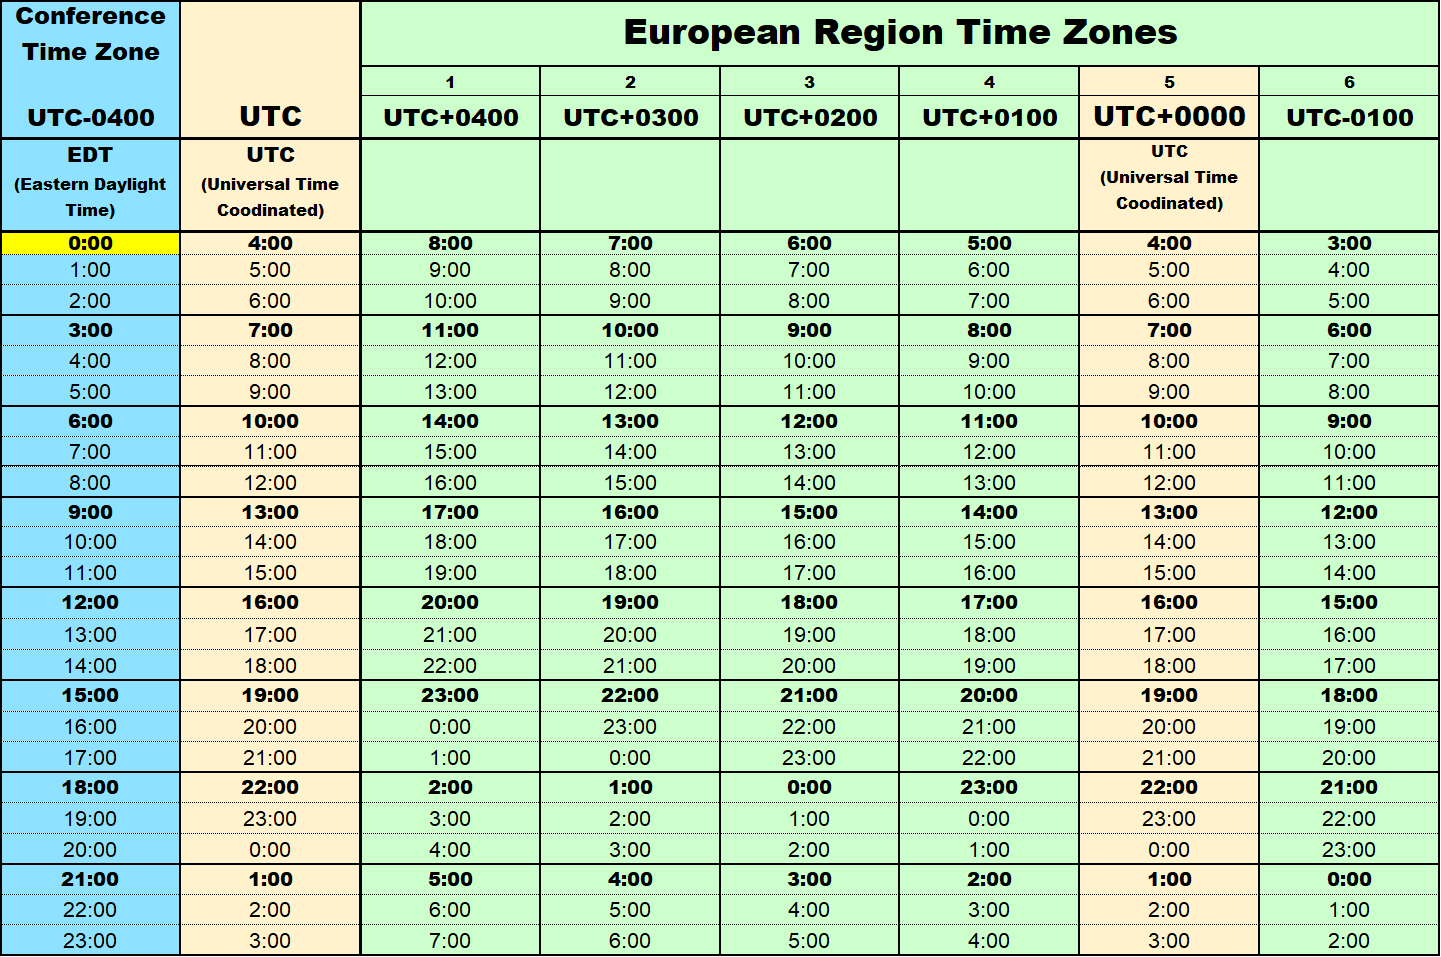 Conference Time Zones - European Region